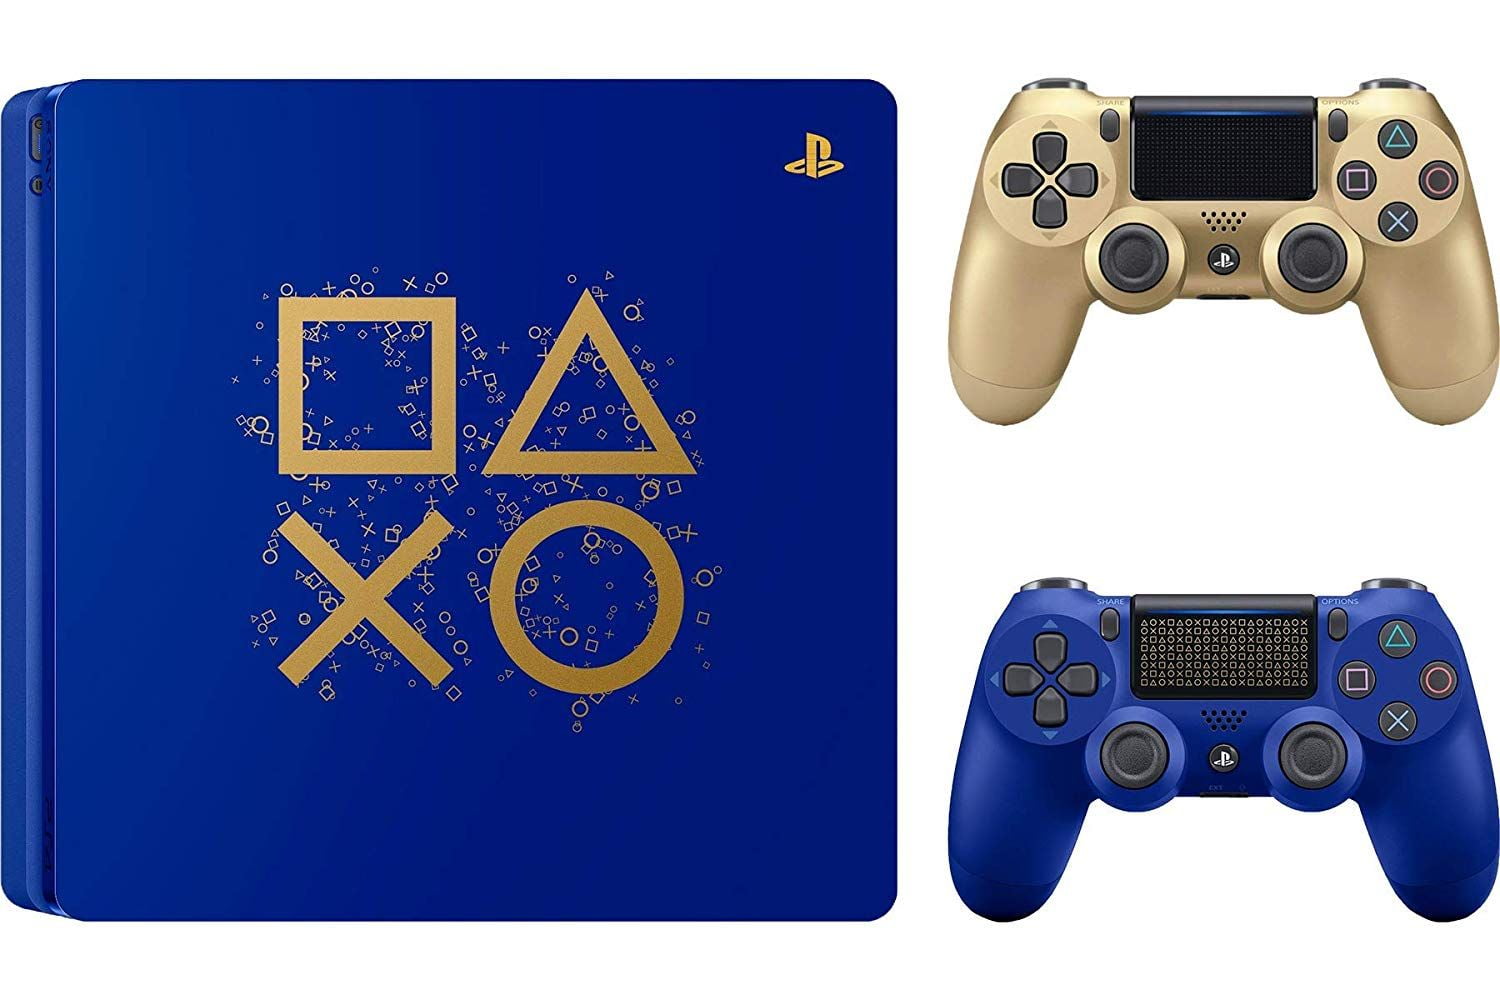 Playstation PS4 Days Play Edition Gaming Bundle: Days of Play PS4 Slim 1TB Console with Limited Controller DualShock 4 Wireless and Extra Gold Wireless Controller - Walmart.com